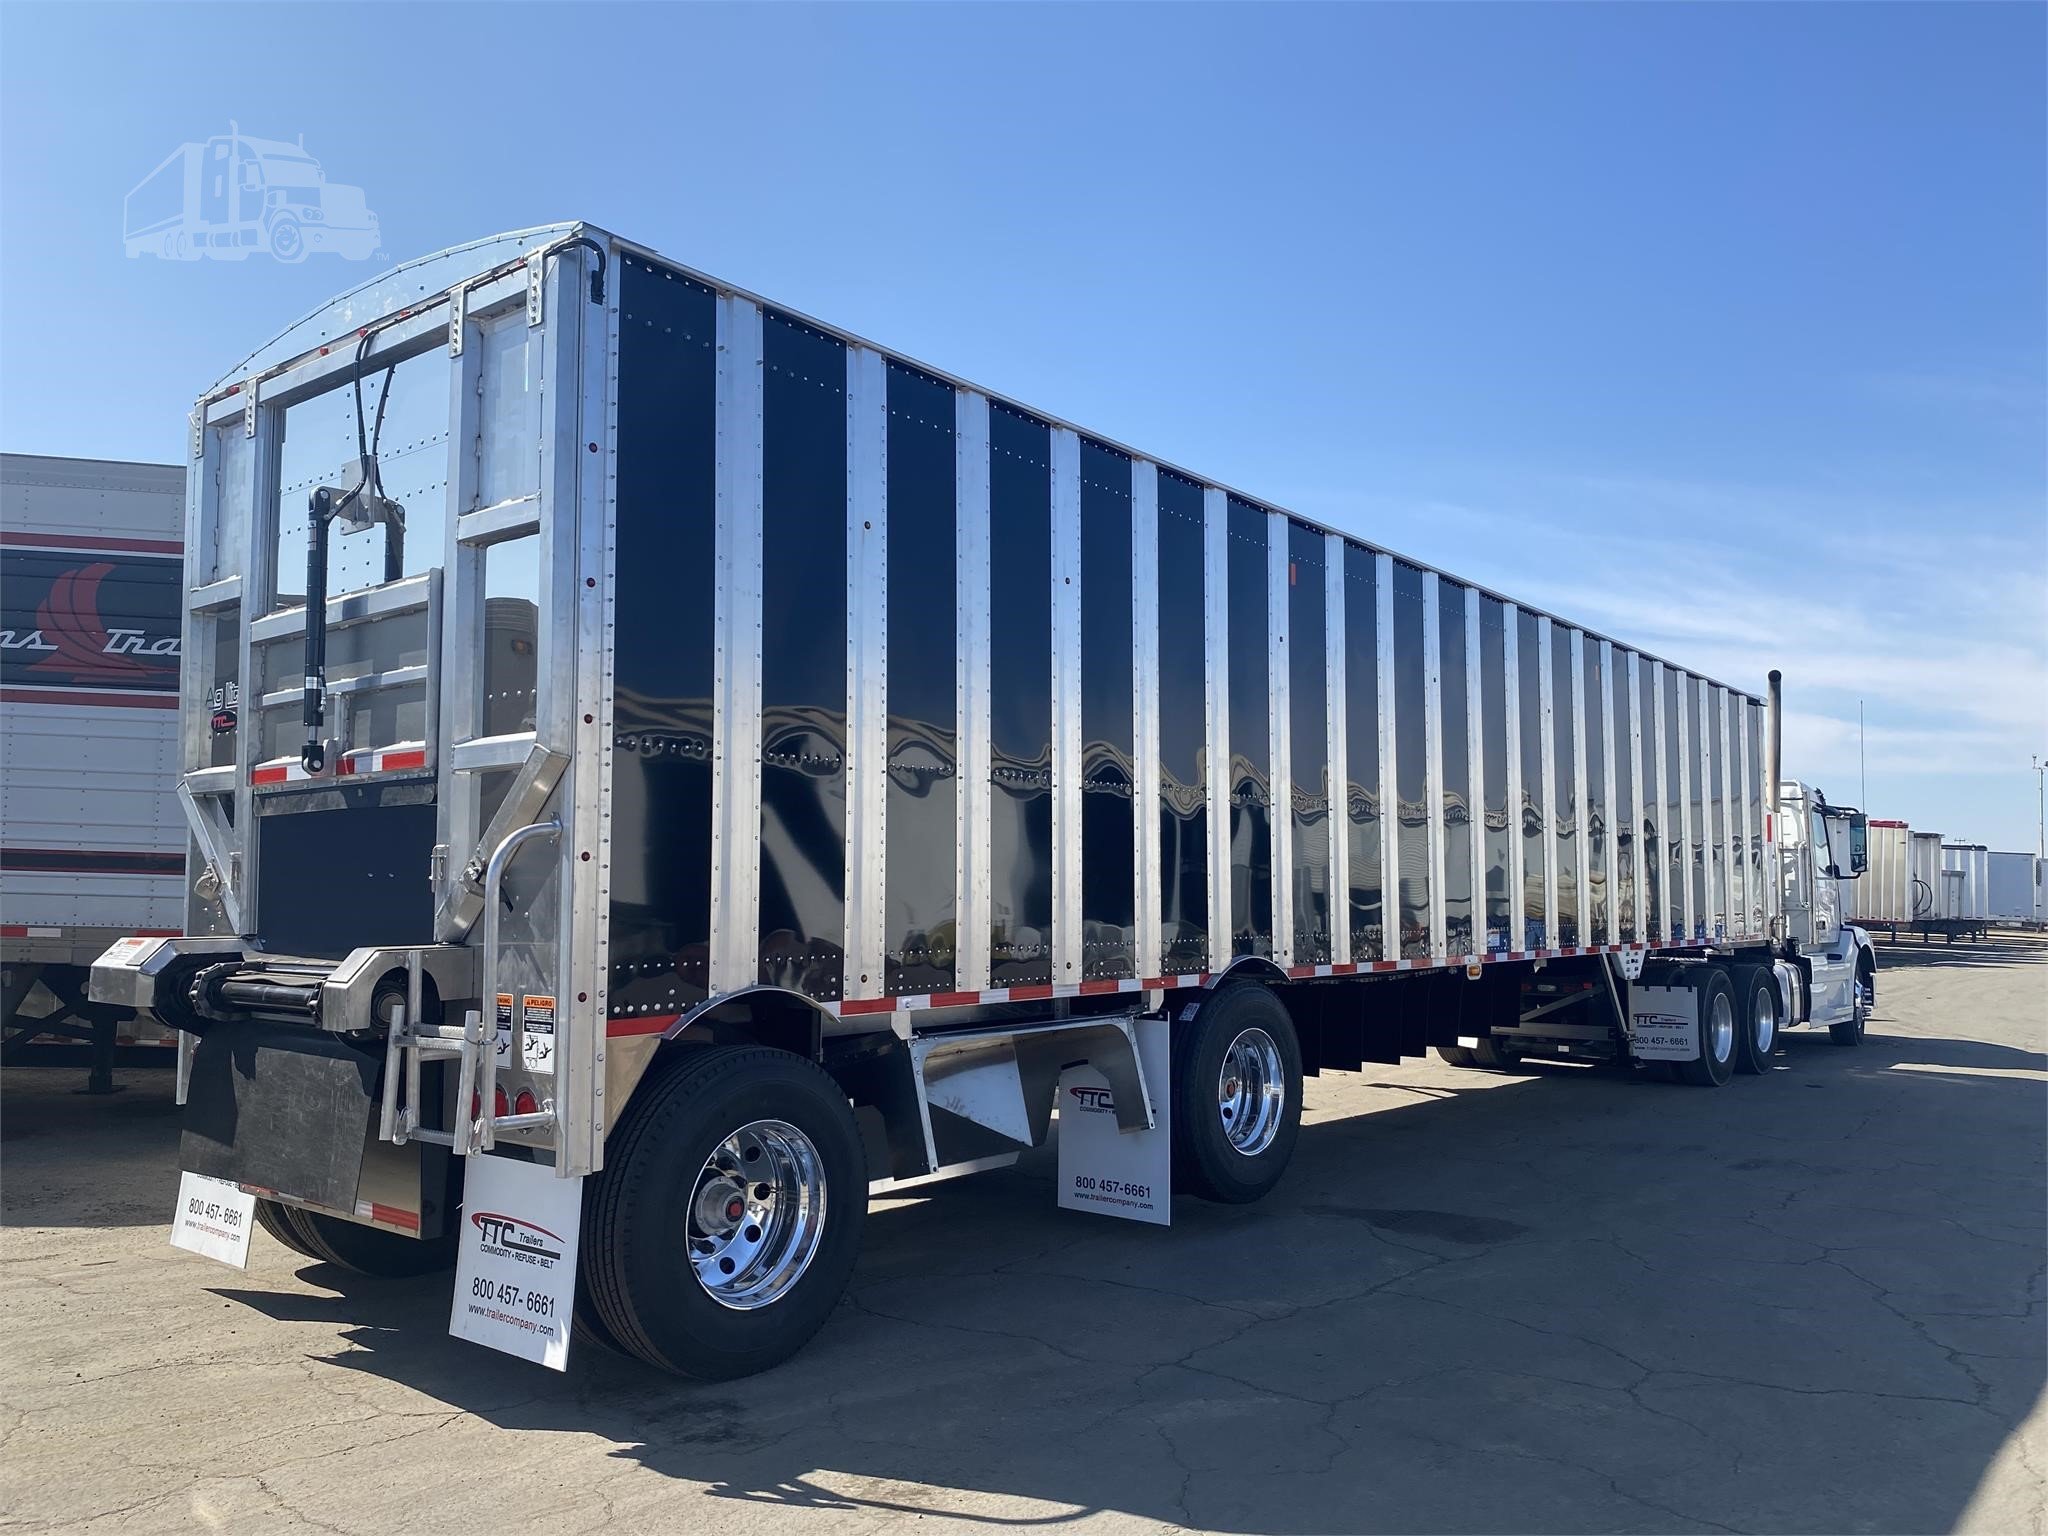 Belt Trailers For Sale By THE TRAILER CO INC - 1 Listings | www